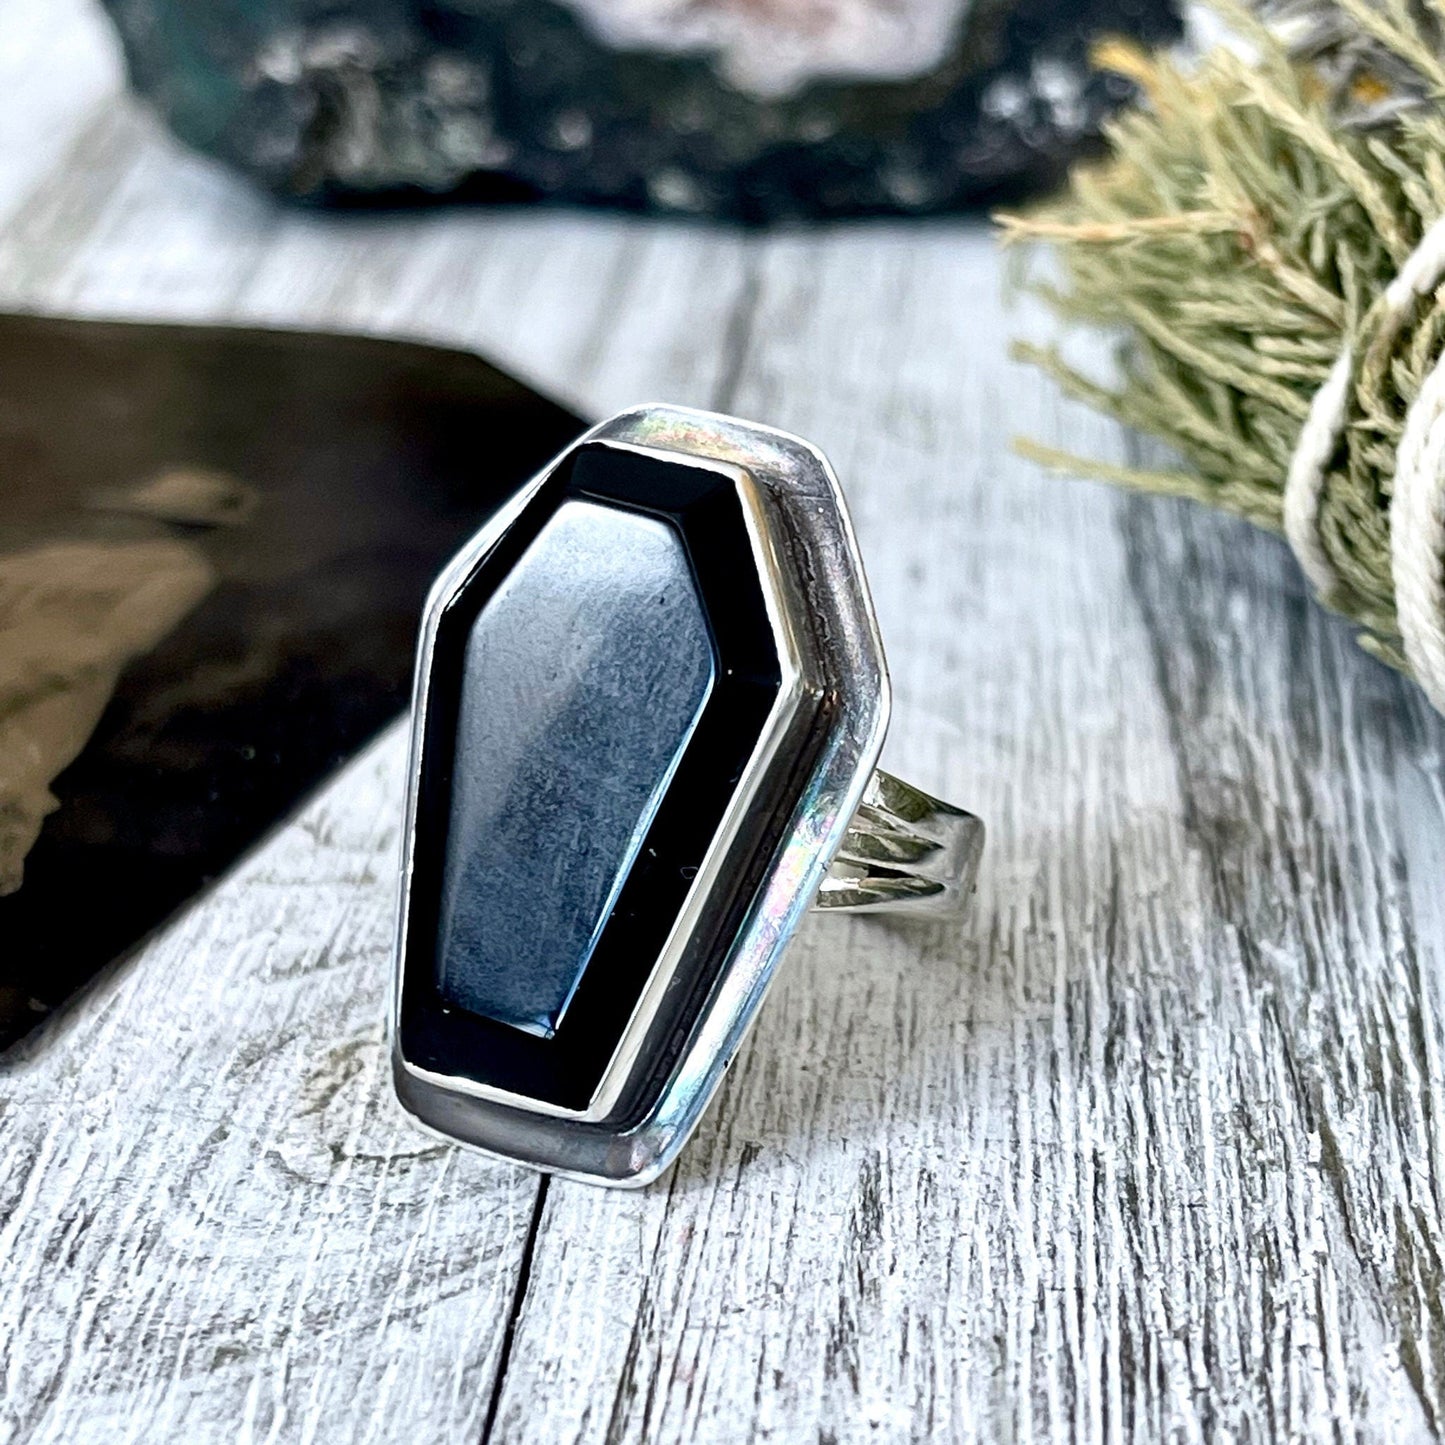 Black Stone Ring, Coffin Jewelry, Coffin Ring, Crescent Moon, Crystal Ring, Etsy Id 1226934118, Foxlark Alchemy, FOXLARK- RINGS, Goth Jewelry, Gypsy Ring, Halloween Jewelry, Halloween Ring, Jewelry, Rings, Statement Rings, Wholesale, Witch Jewelry